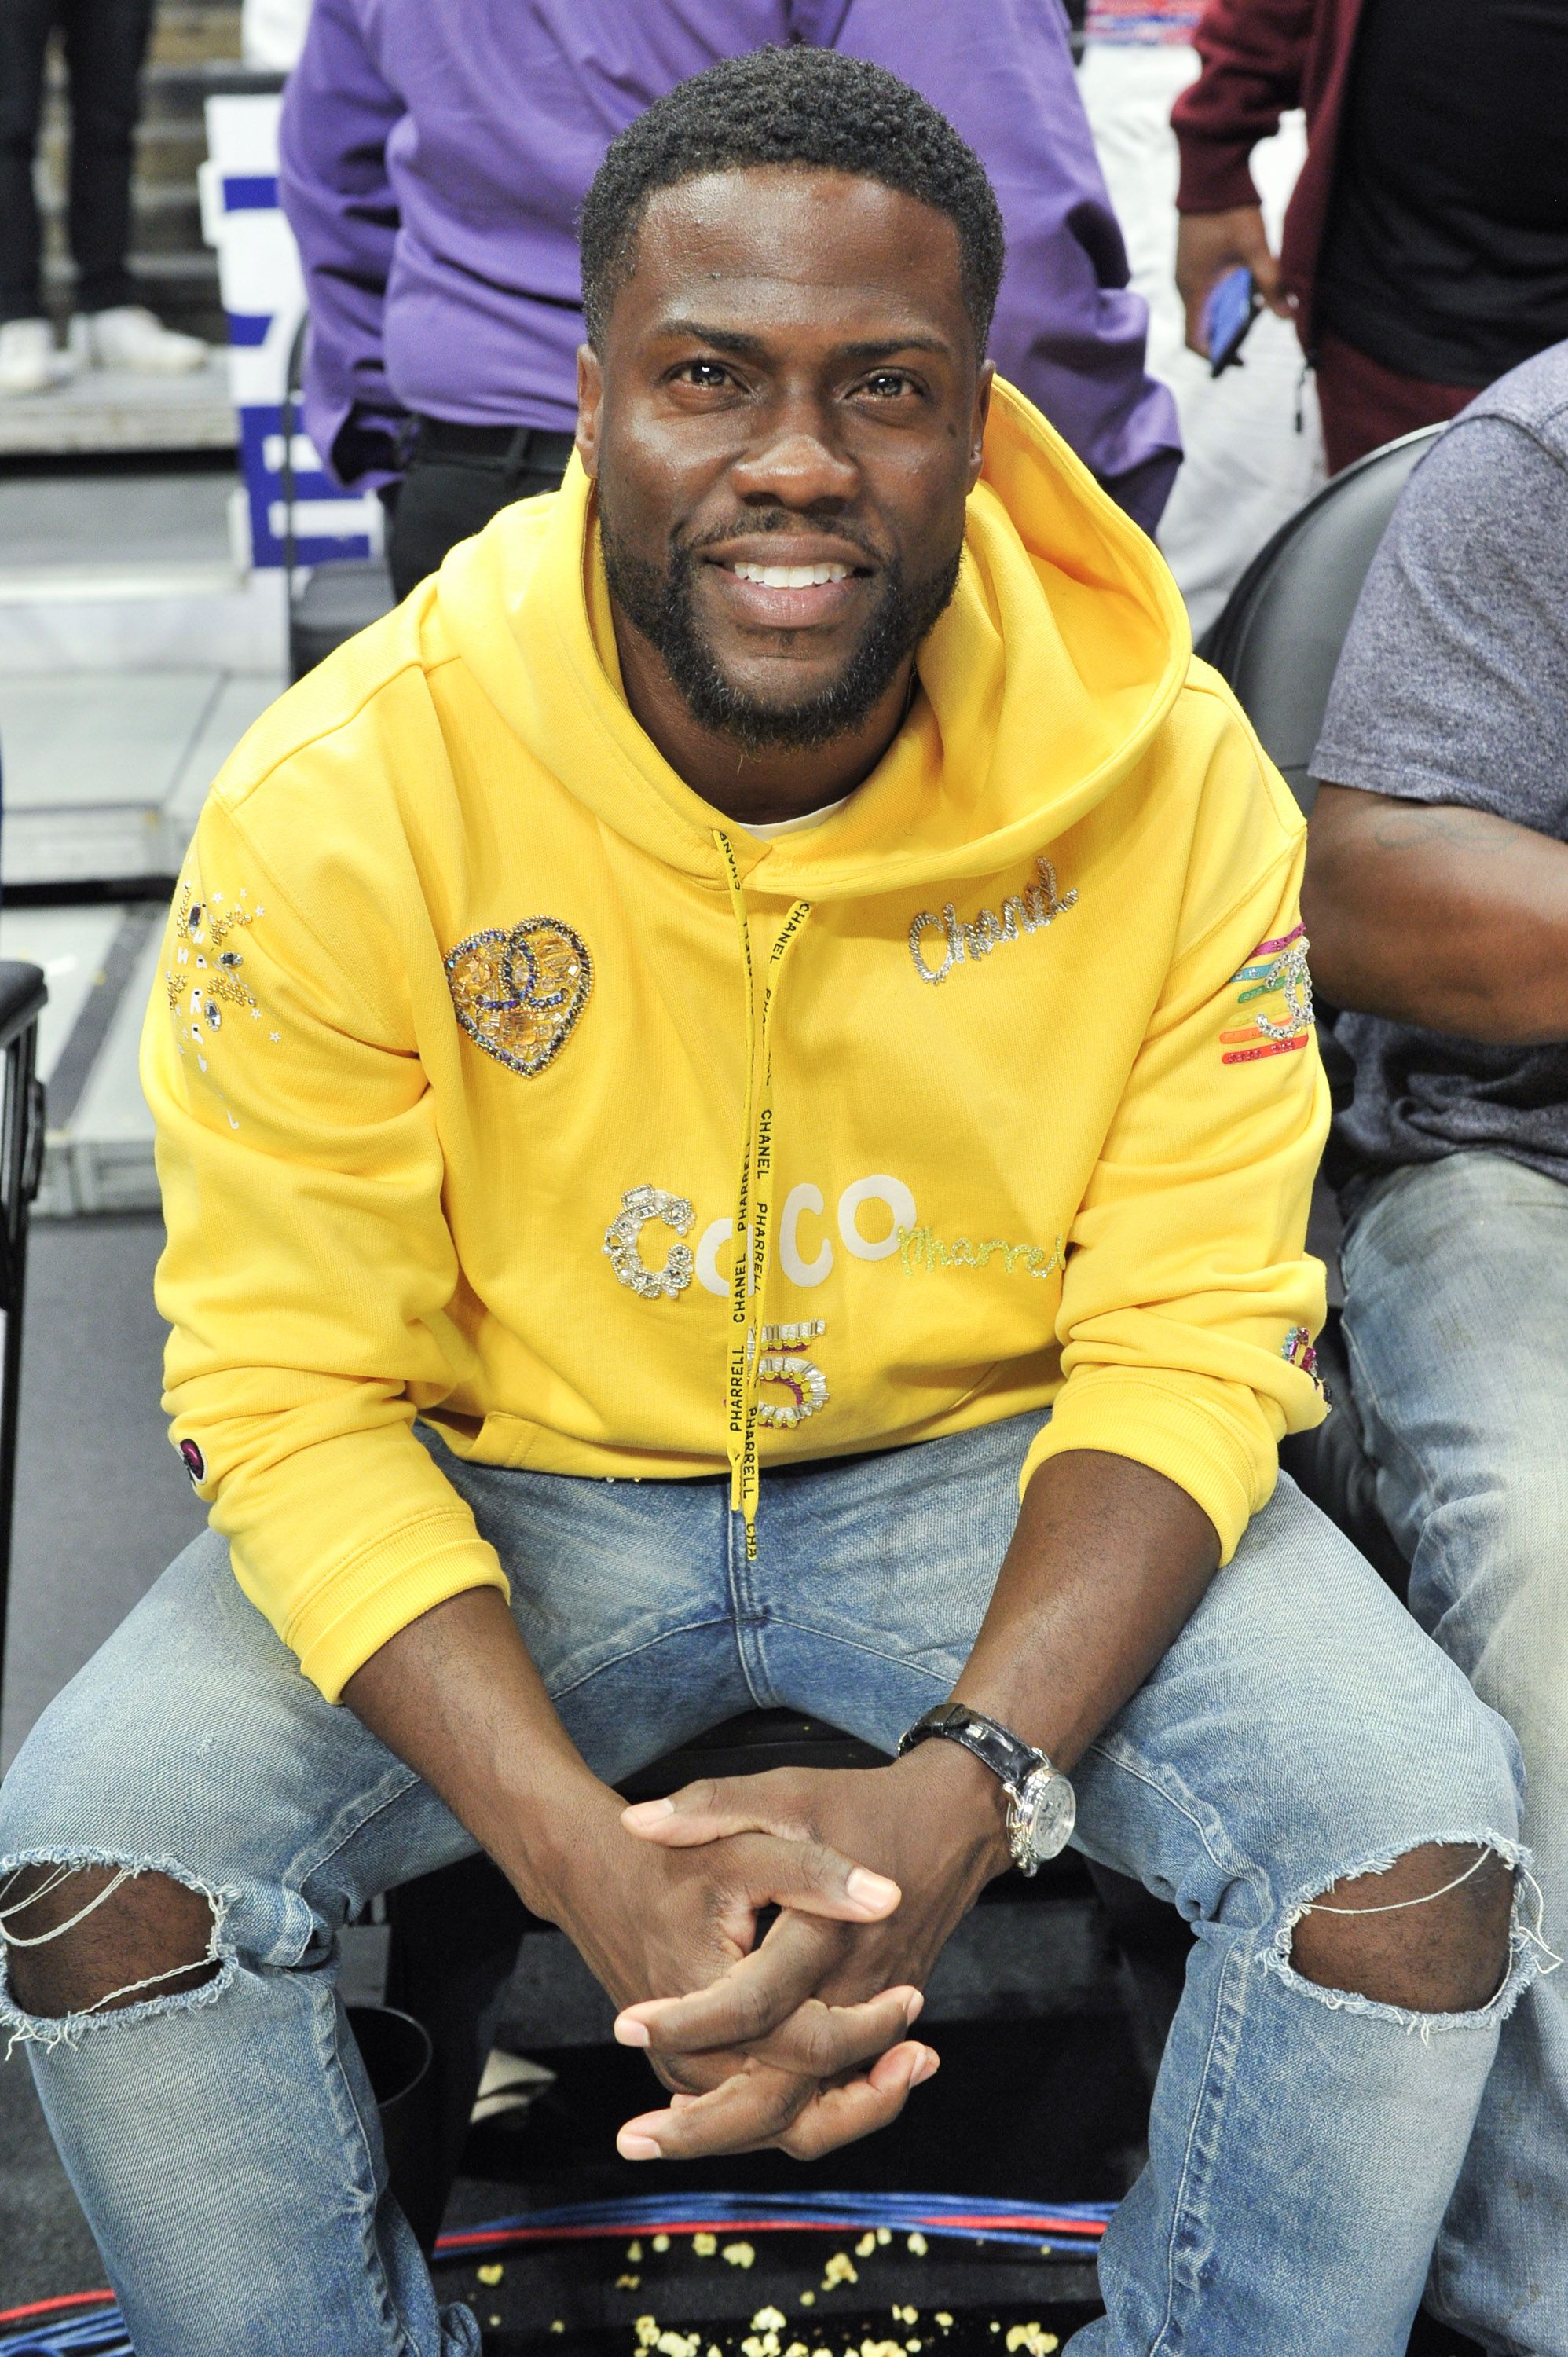 Kevin Hart at a basketball game between the L.A Clippers and the Toronto Raptors on November 11, 2019 in Los Angeles, California. | Source: Getty Images